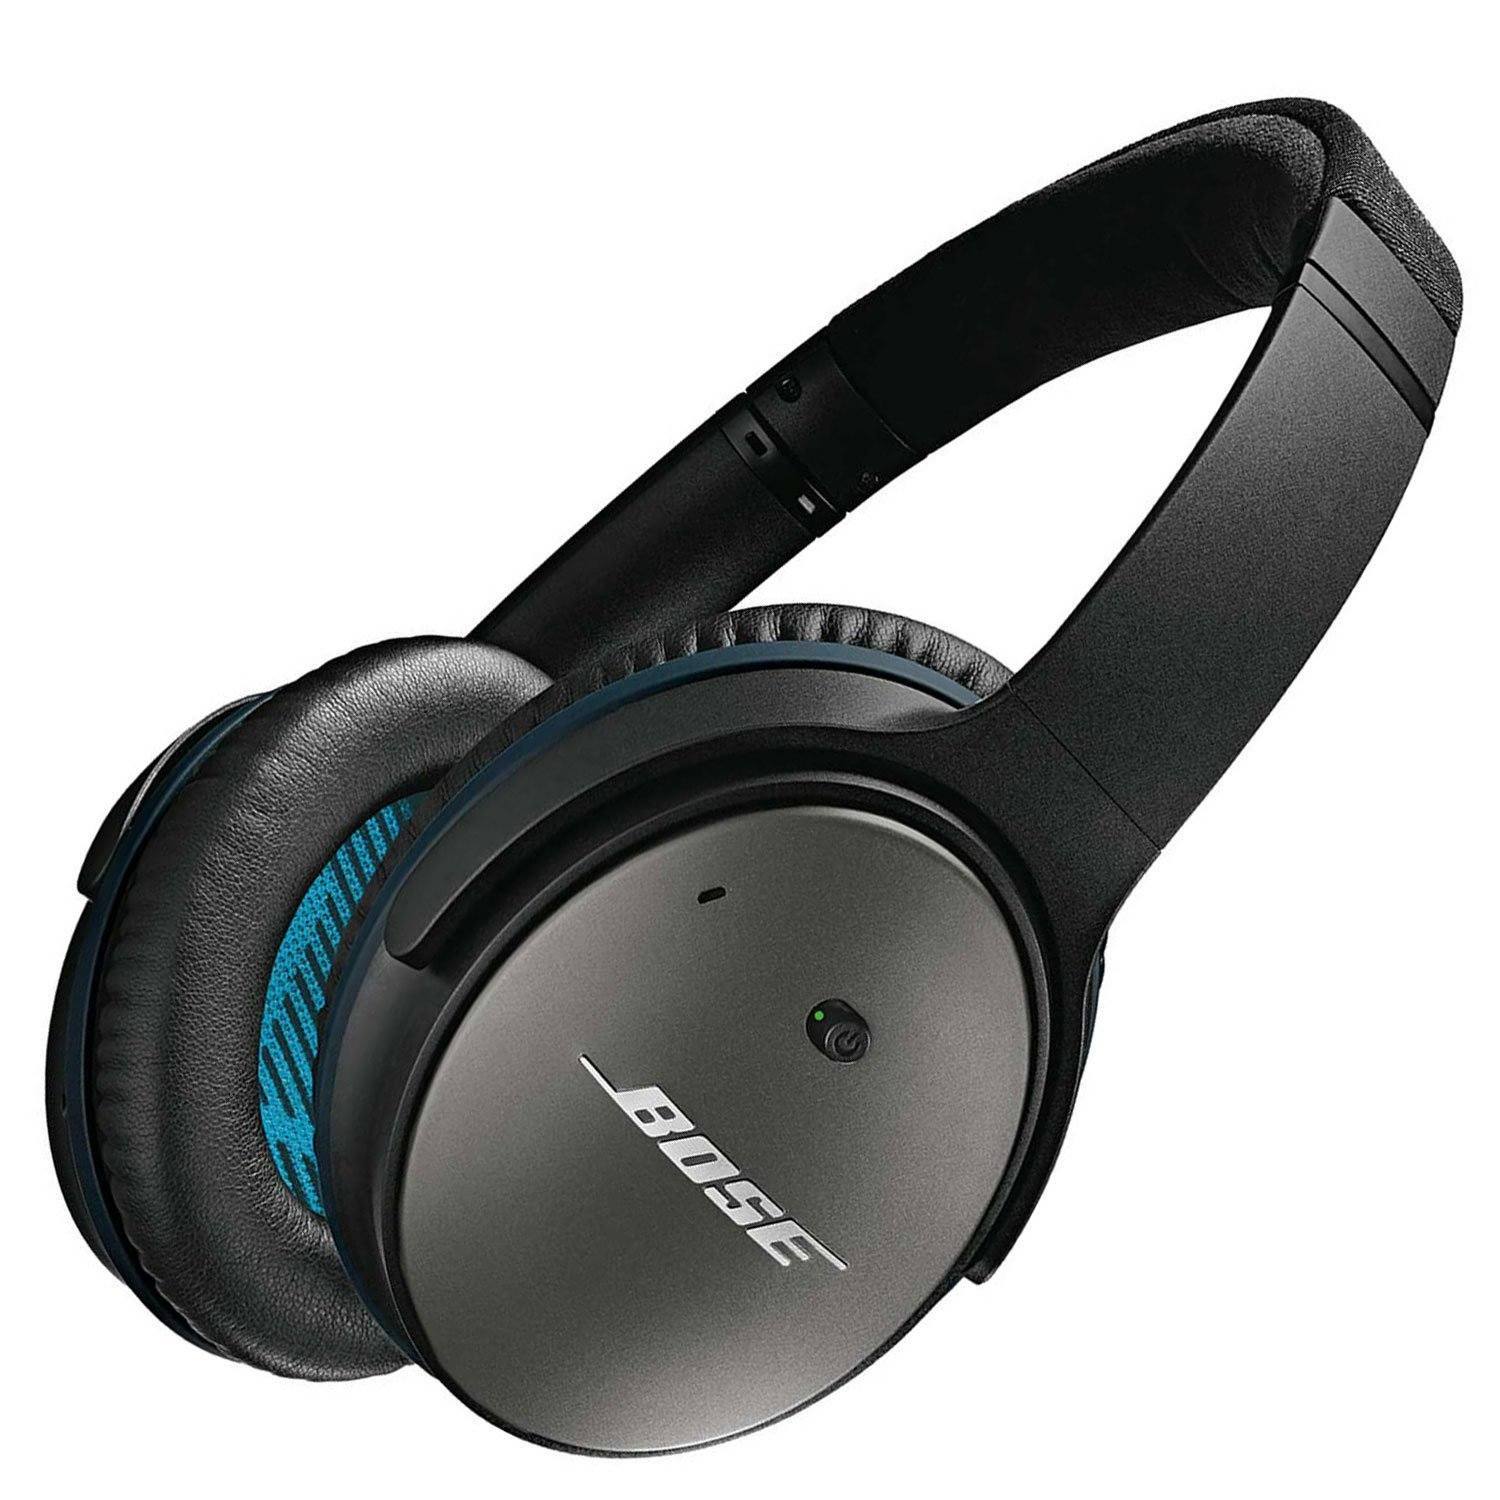 Bose QuietComfort 25 Review - Is the Bose QC25 the BEST Noise 